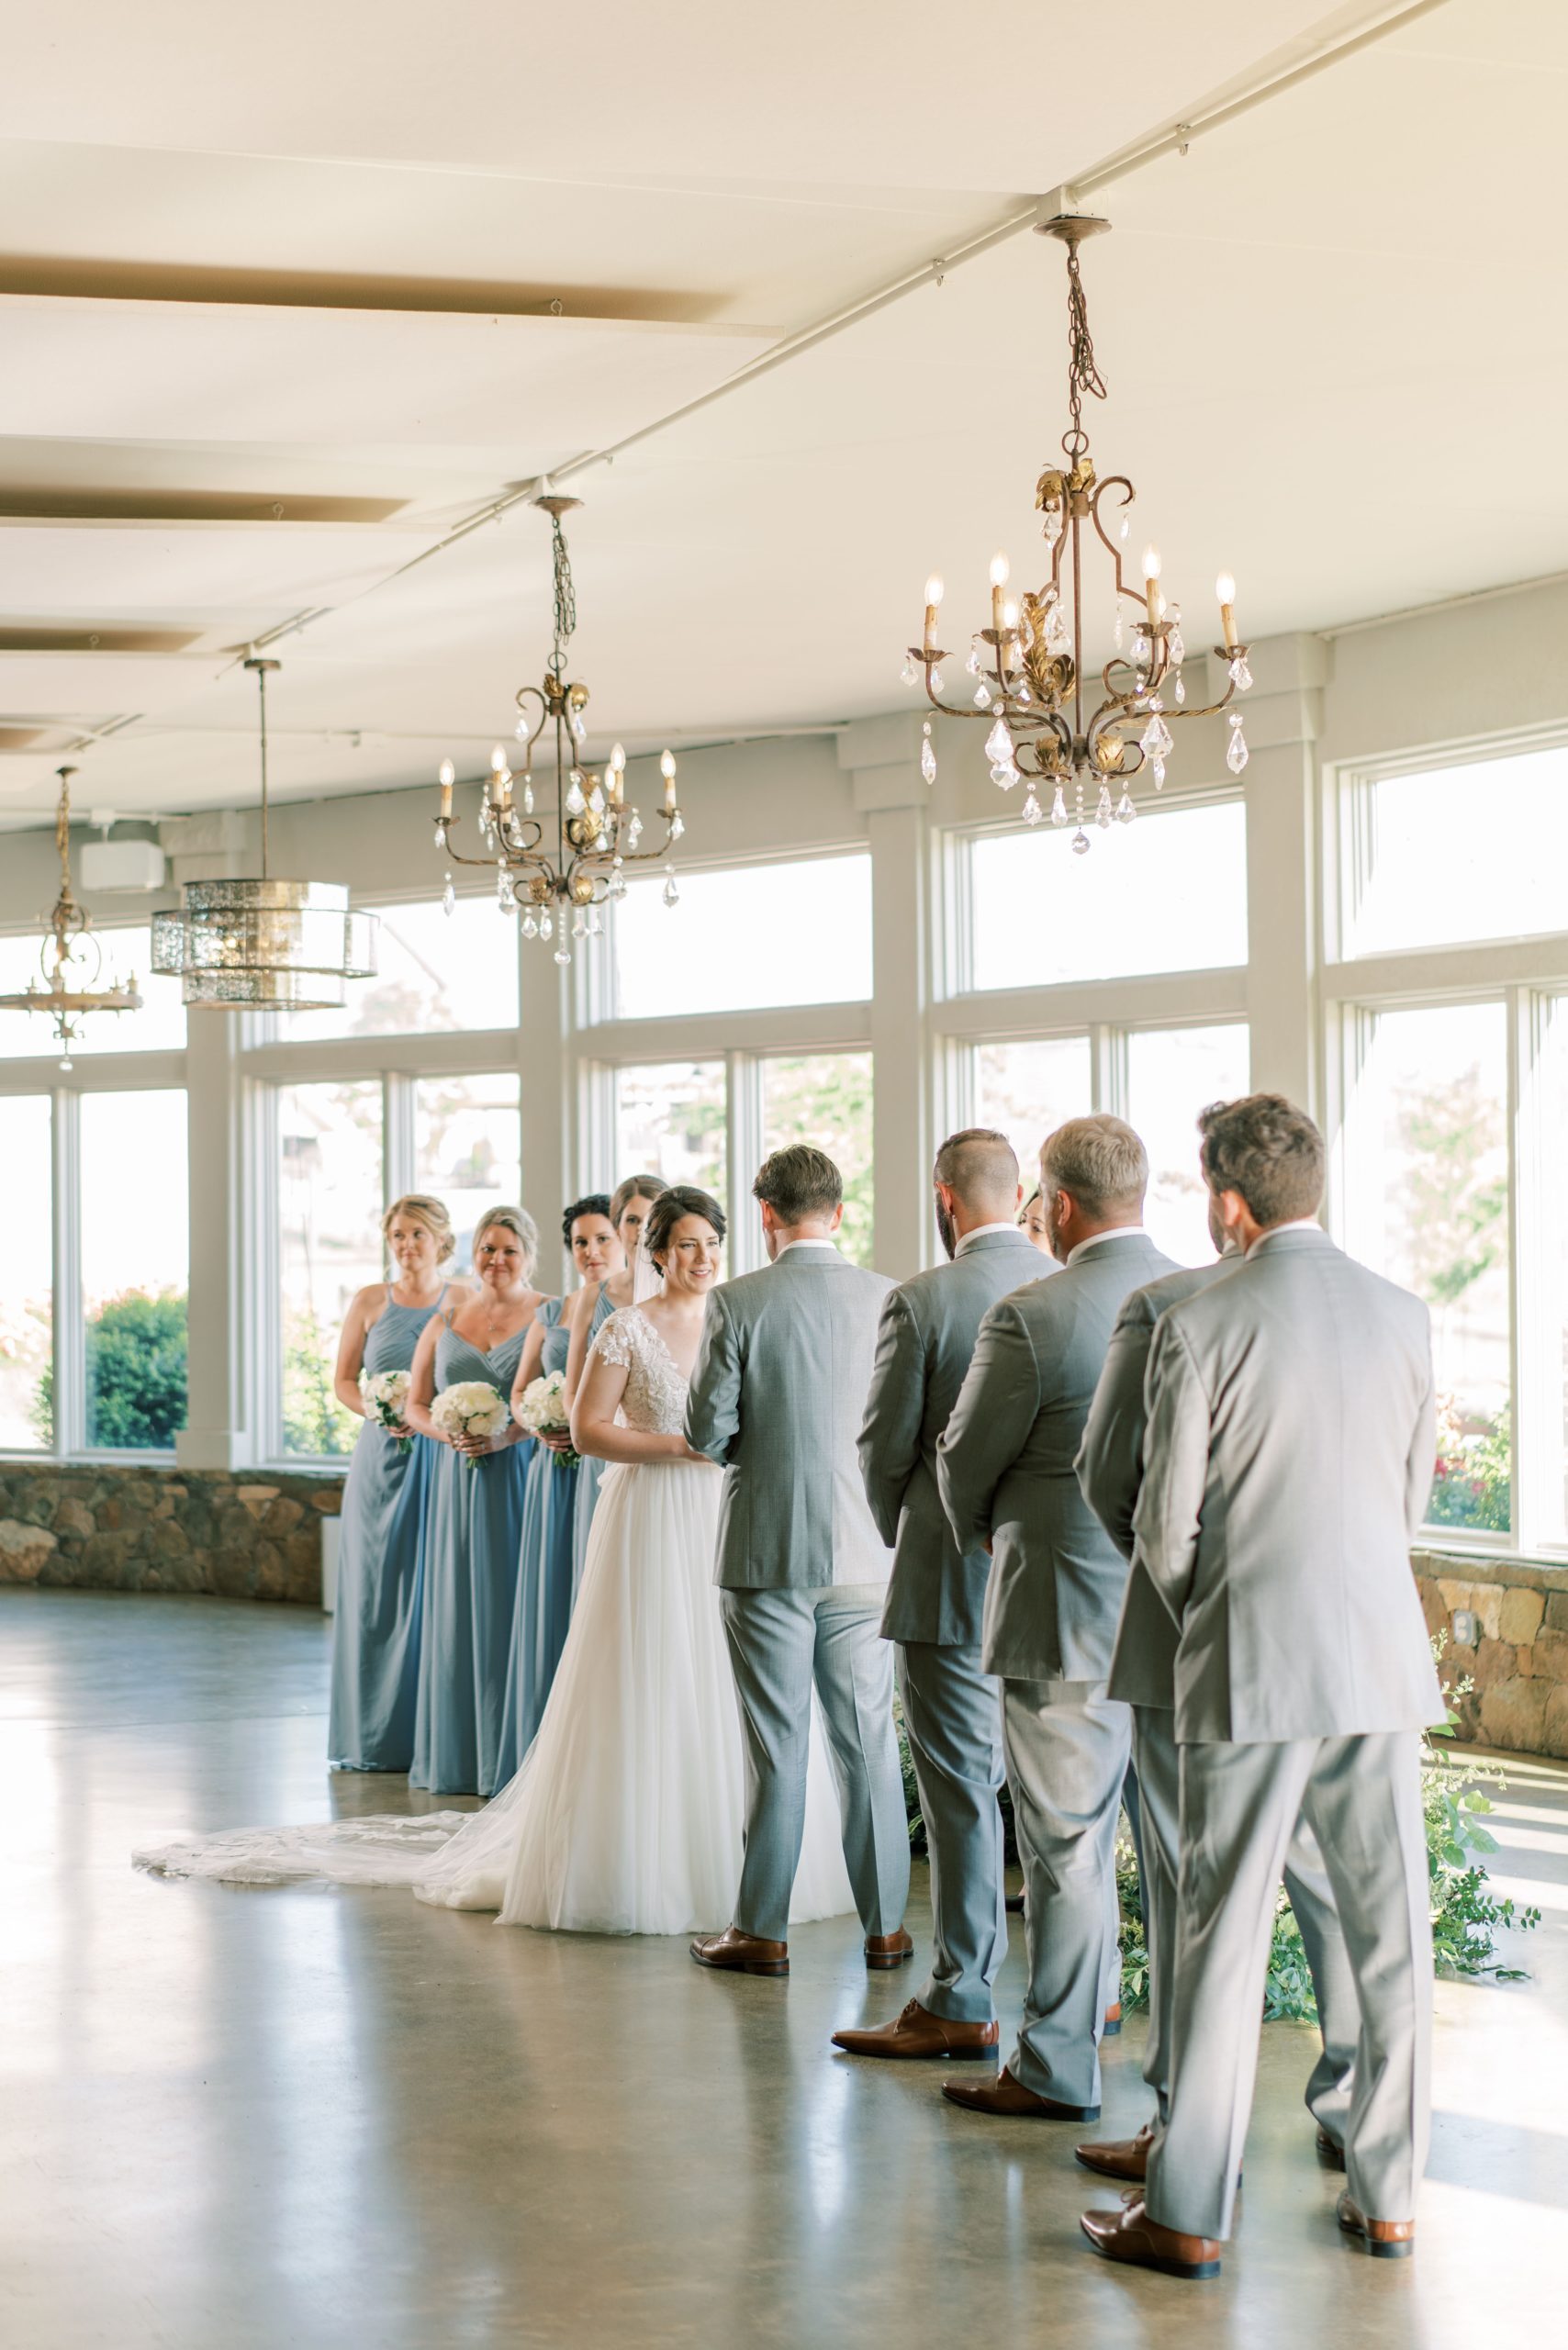 A beautiful spring wedding at Stone Tower Winery in Leesburg, VA is captured by DC film photographer, Alicia Lacey. 